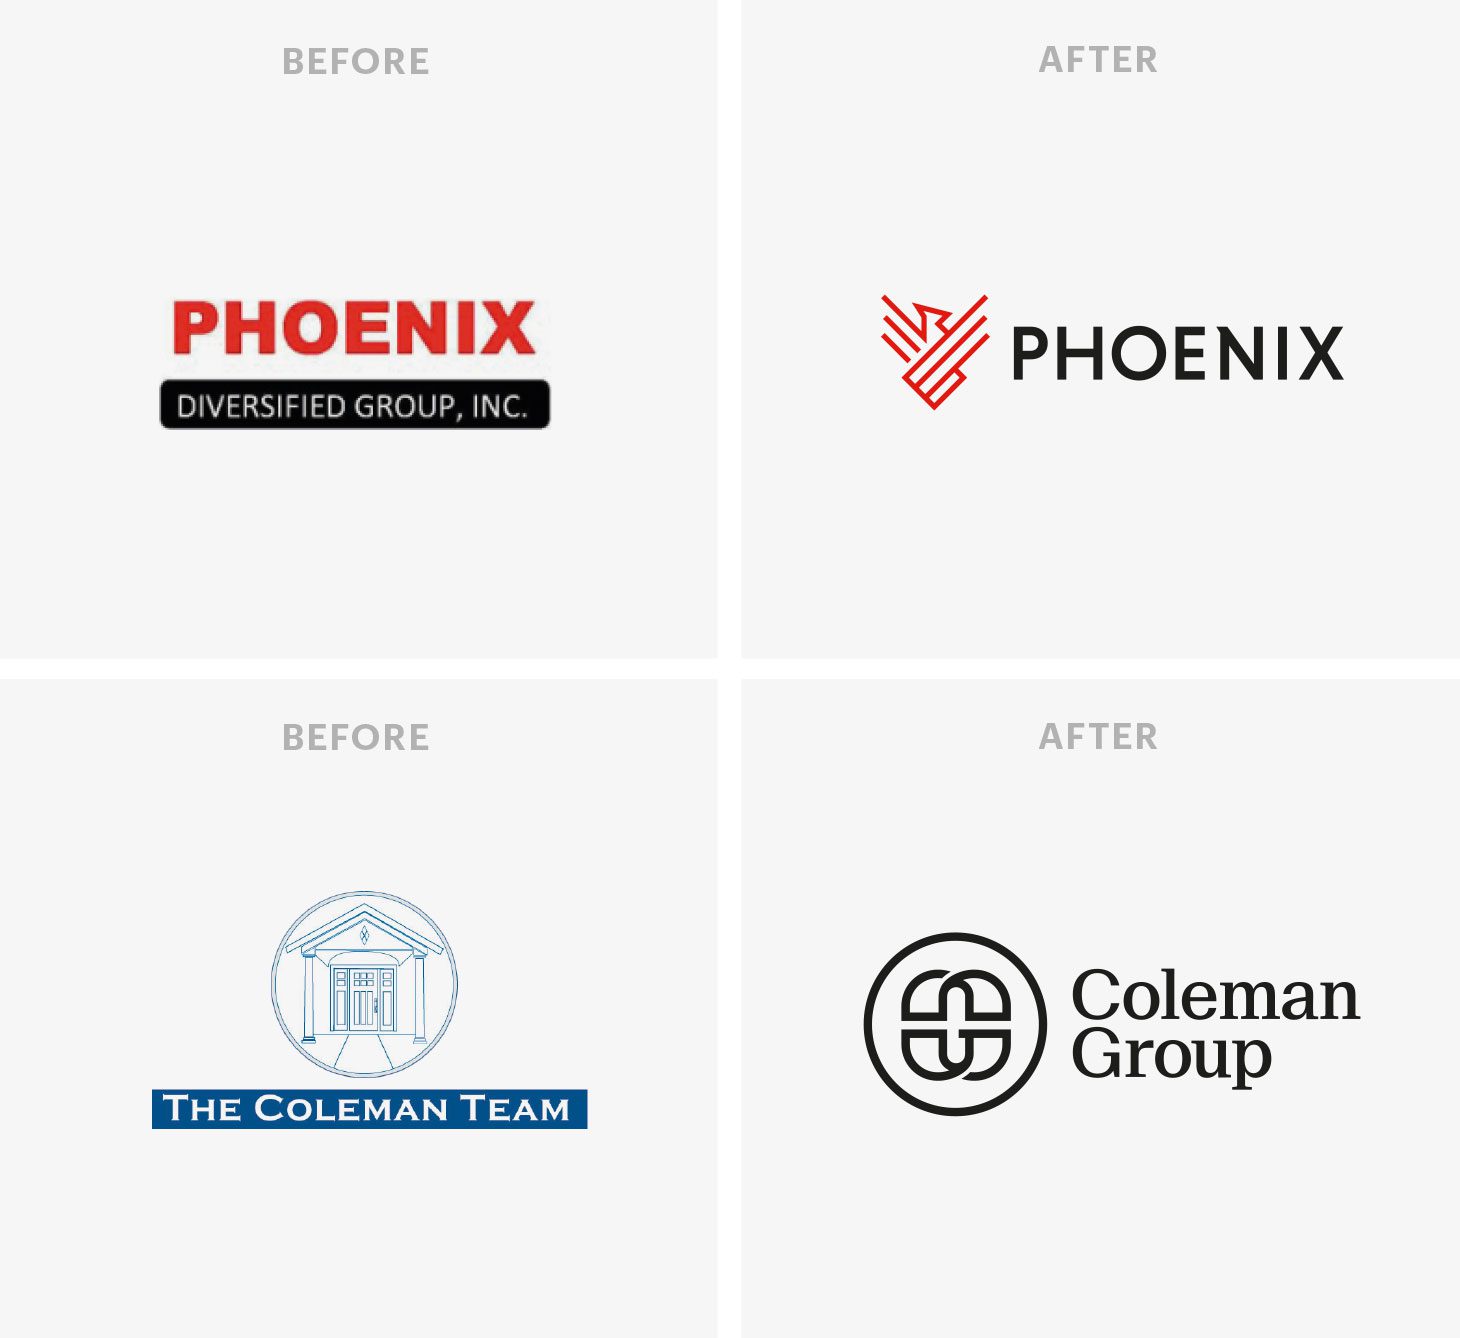 Logos Before and After 2